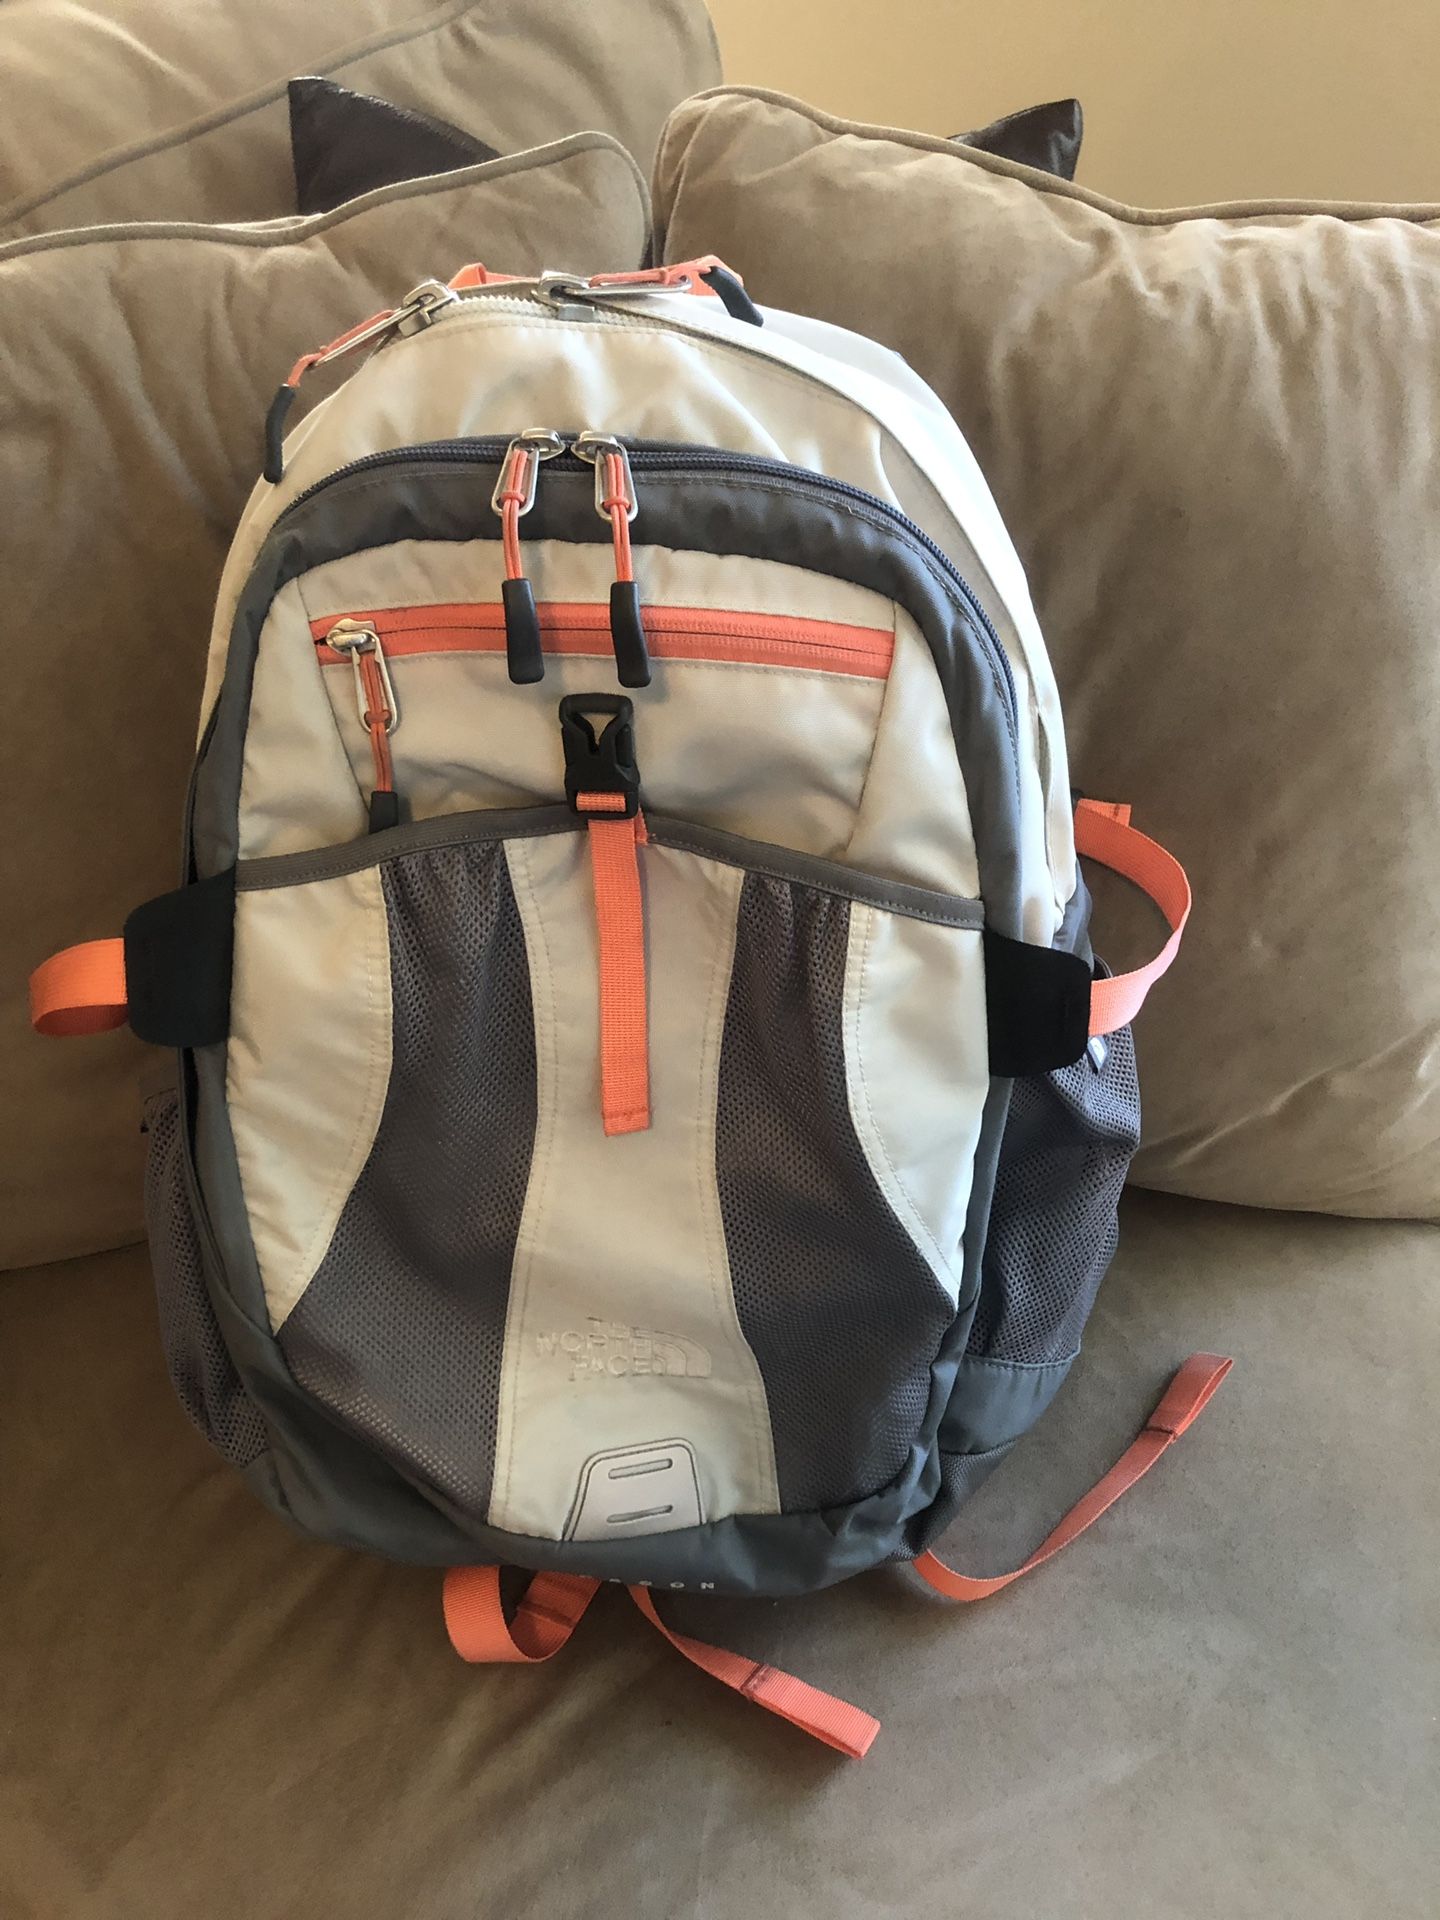 NorthFace Backpack